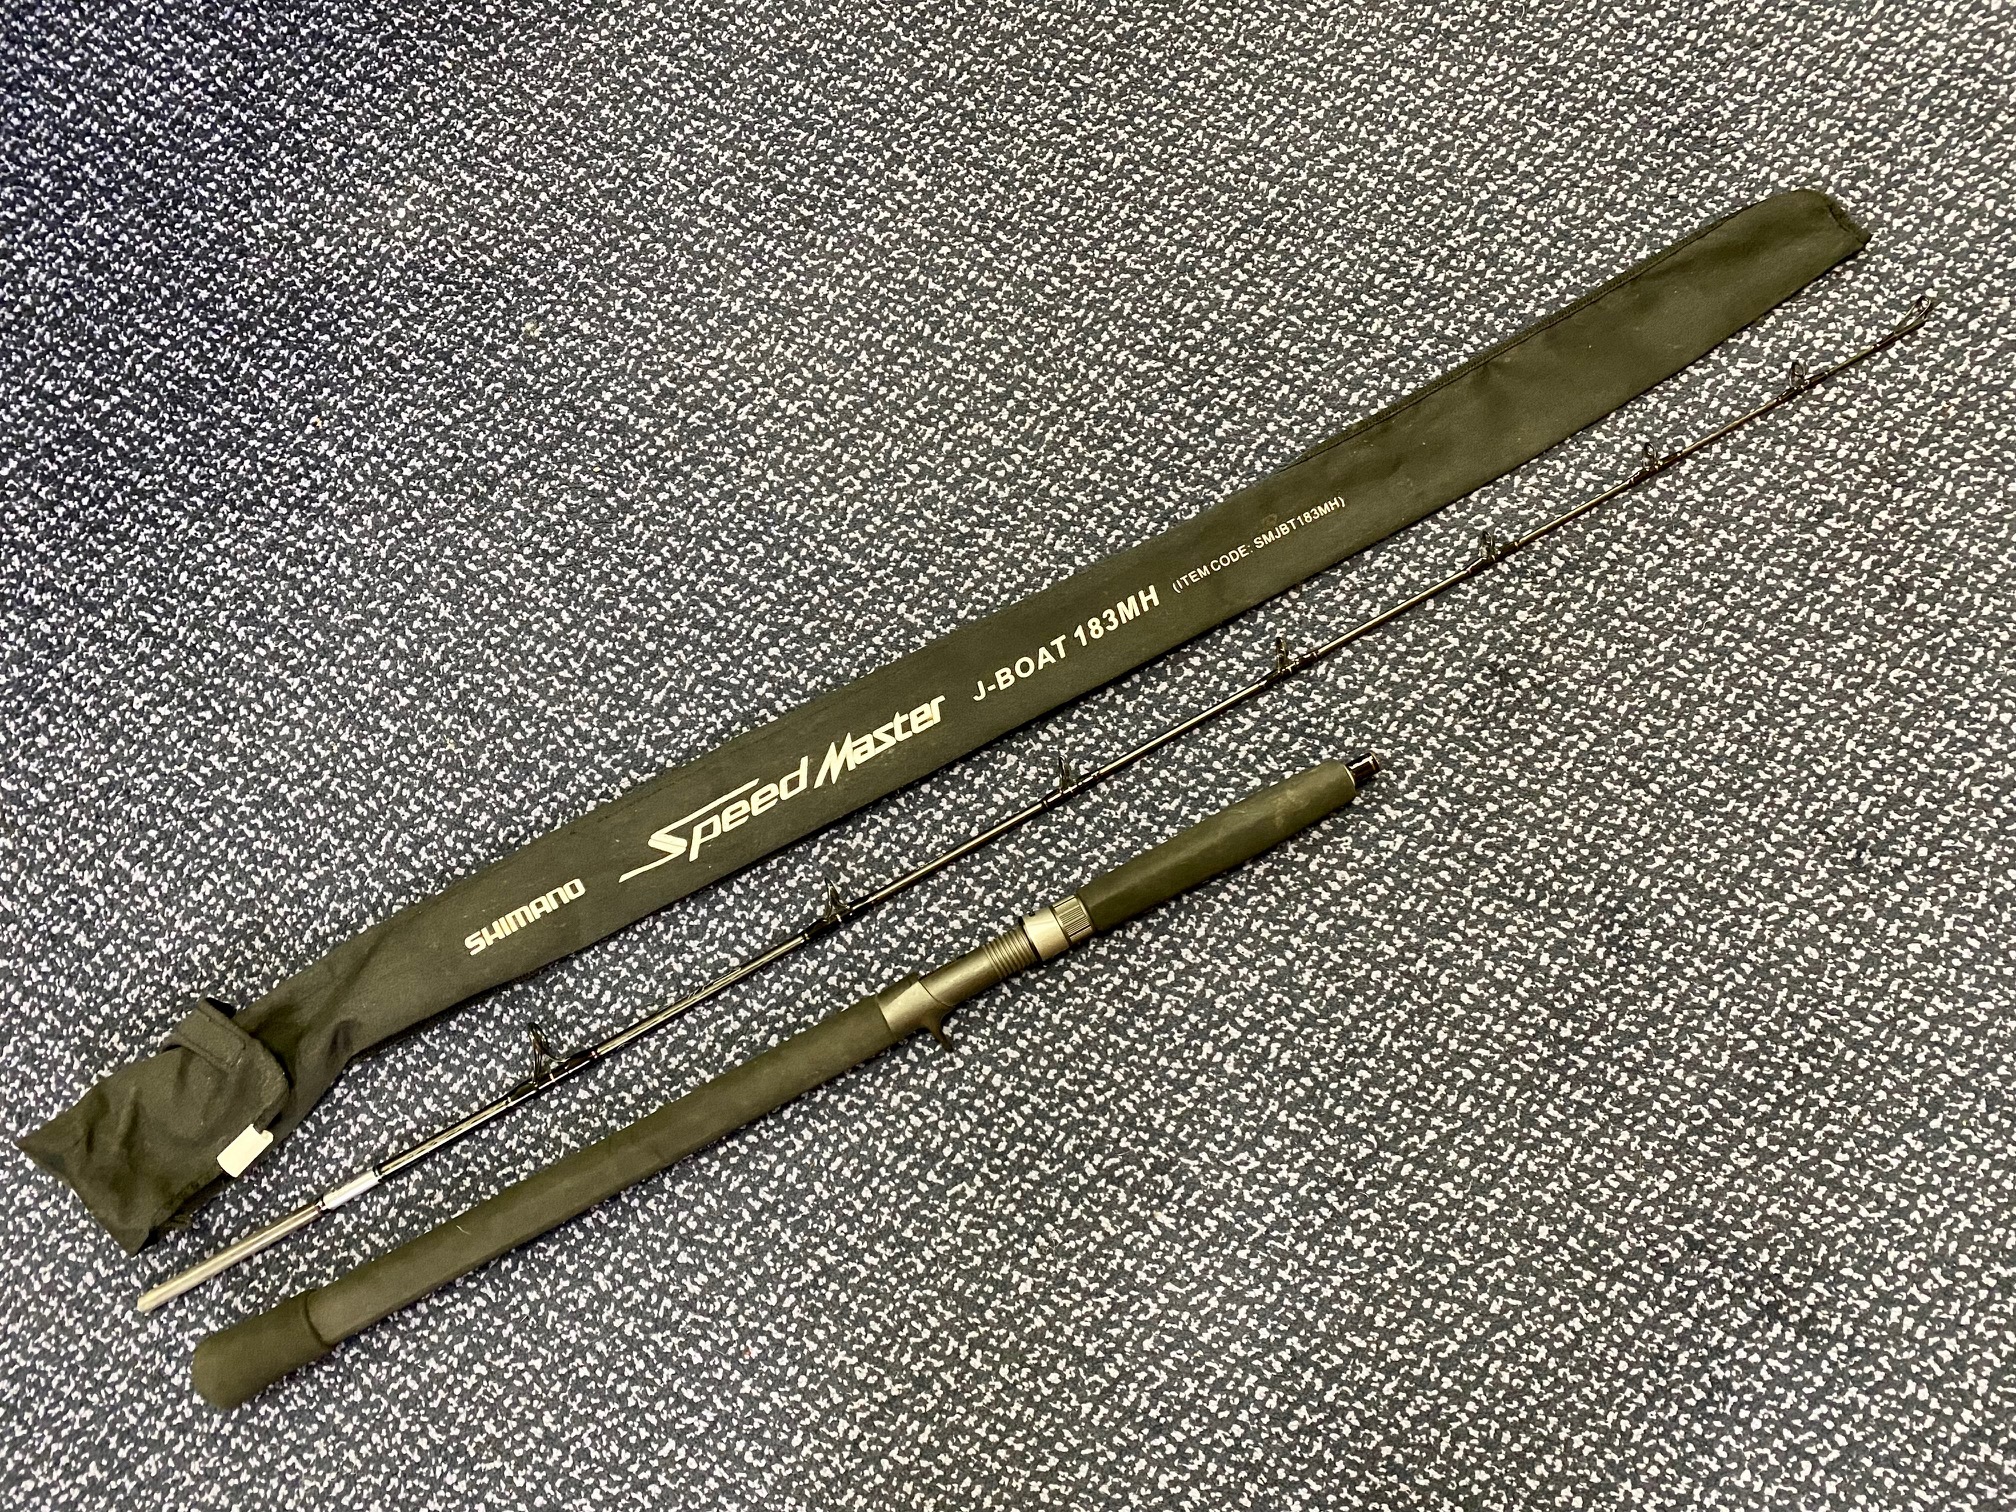 Preloved Shimano Speedmaster Jig Rod 2 piece Trigger 1.83m MH (in bag) -  Used – Glasgow Angling Centre